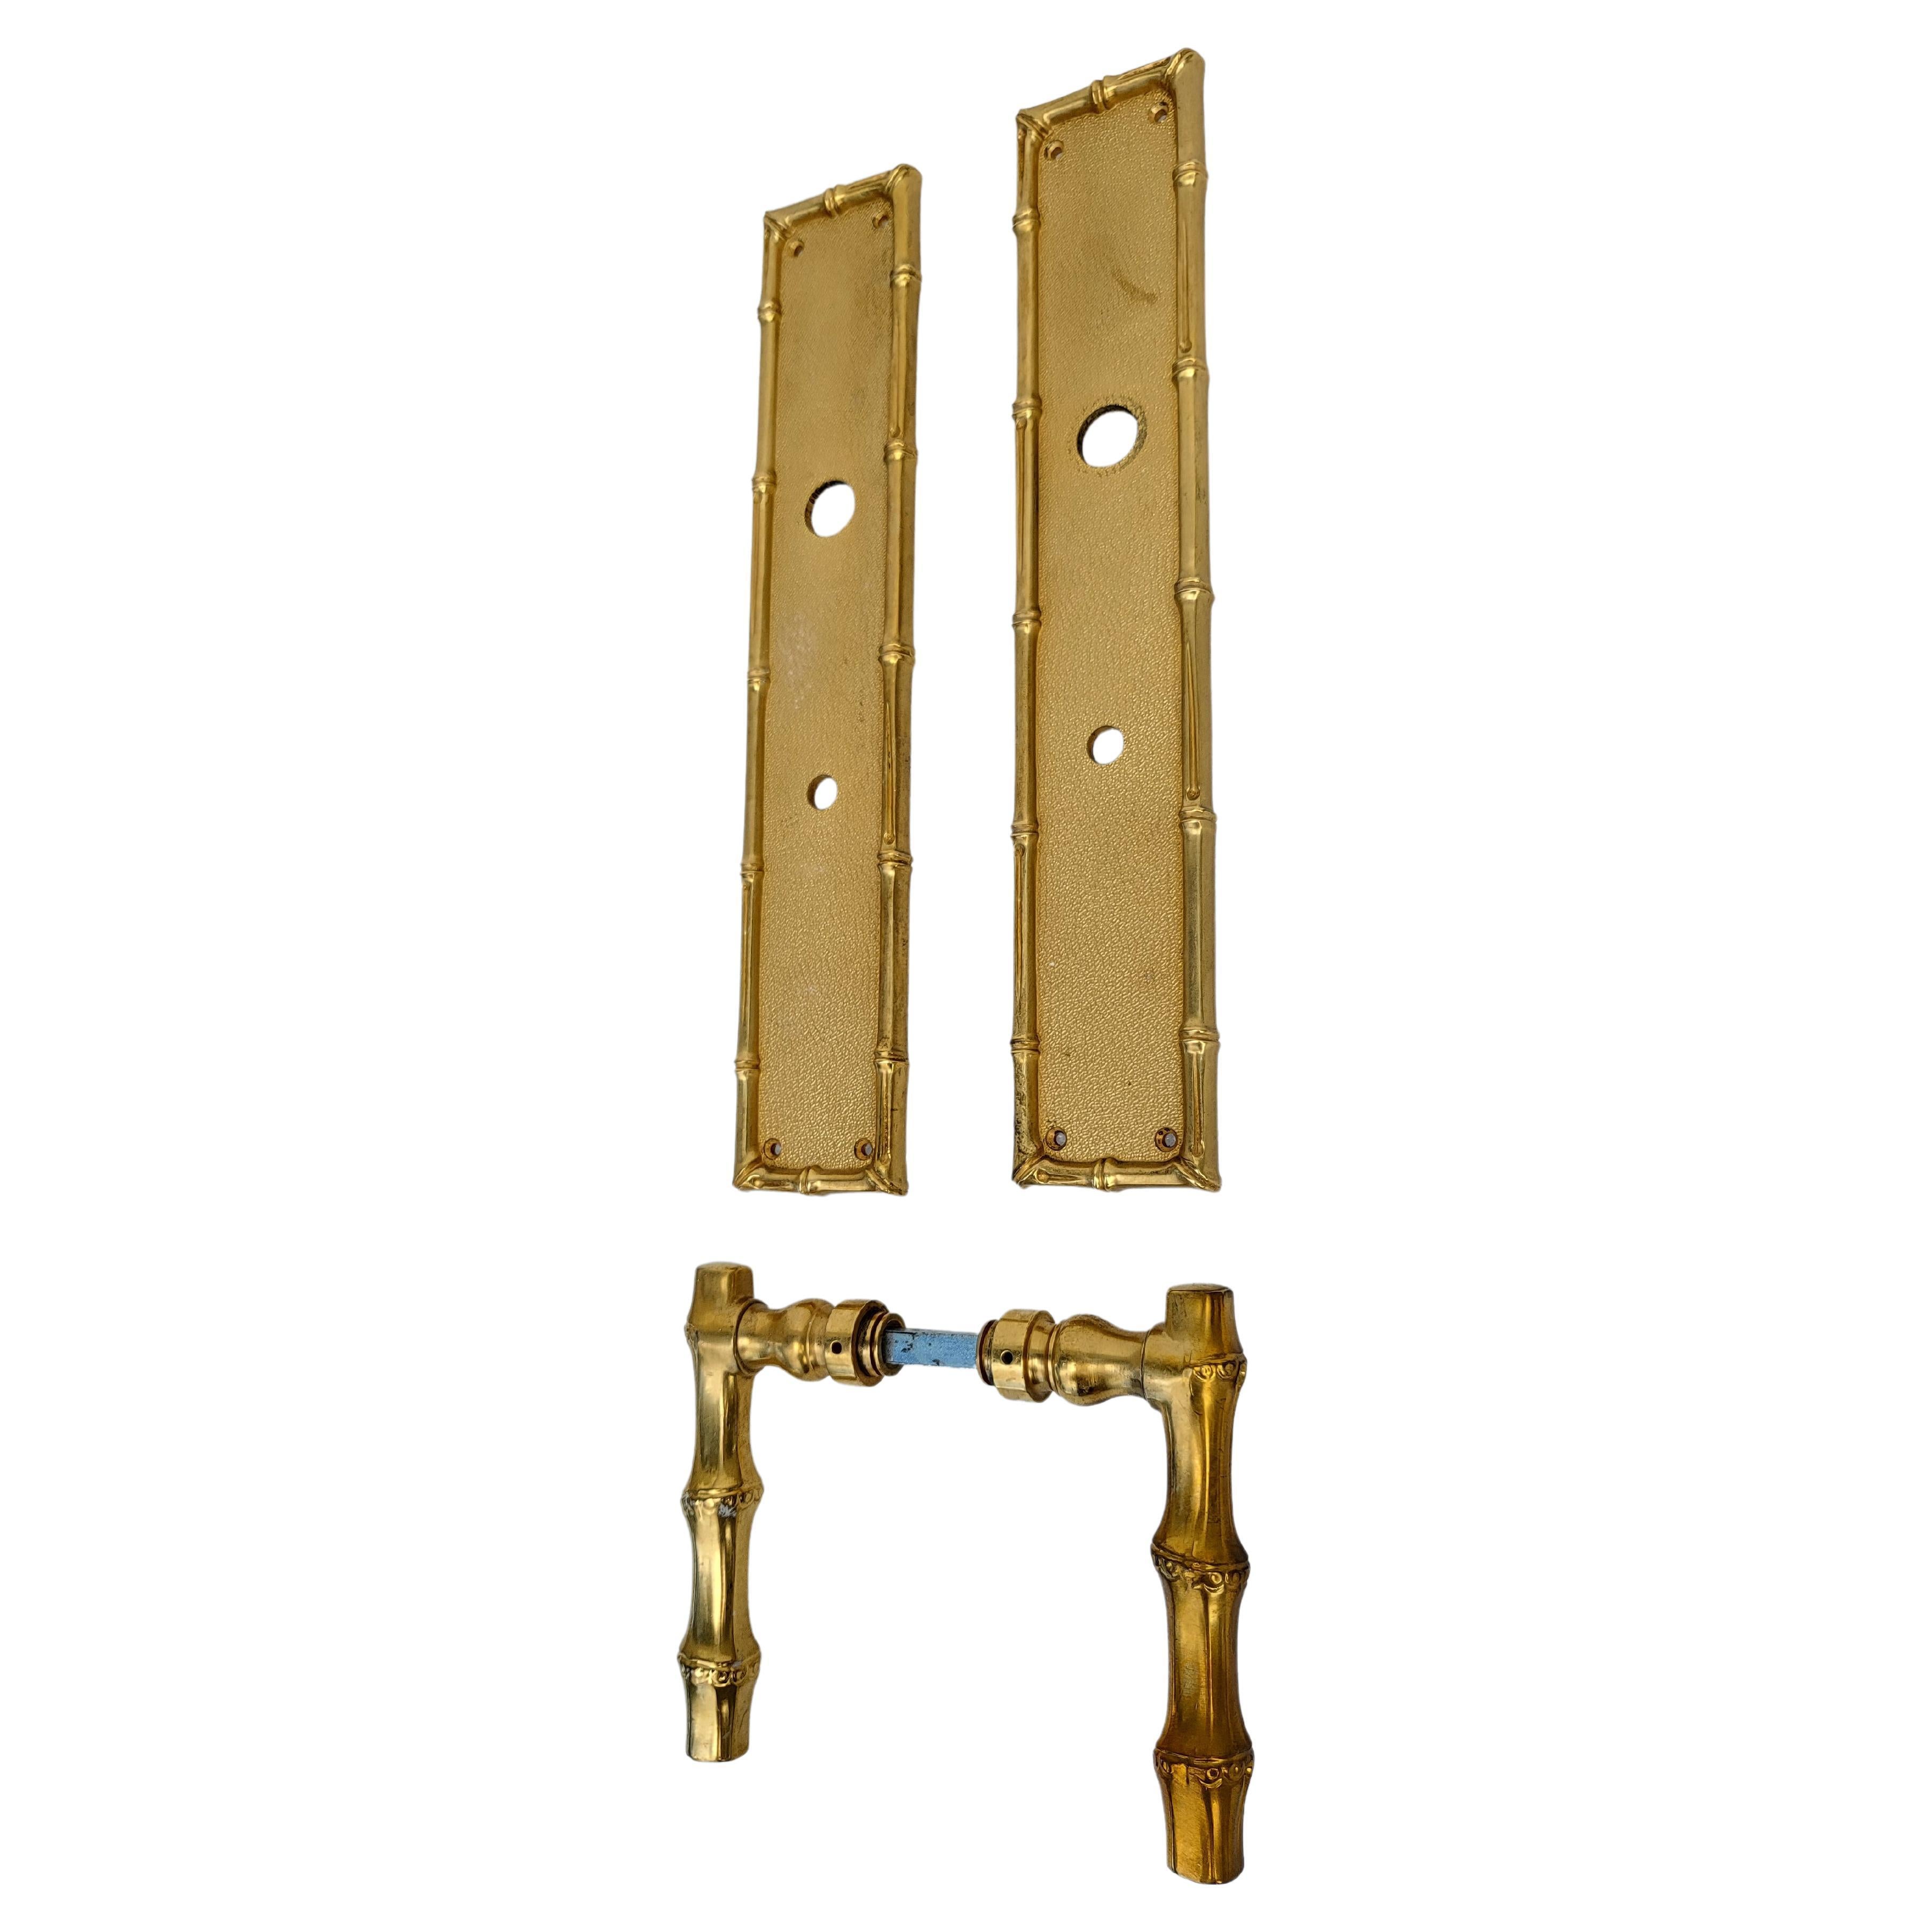 Maison Baguès Door Handles, 8 Pairs Available, Priced by Pair